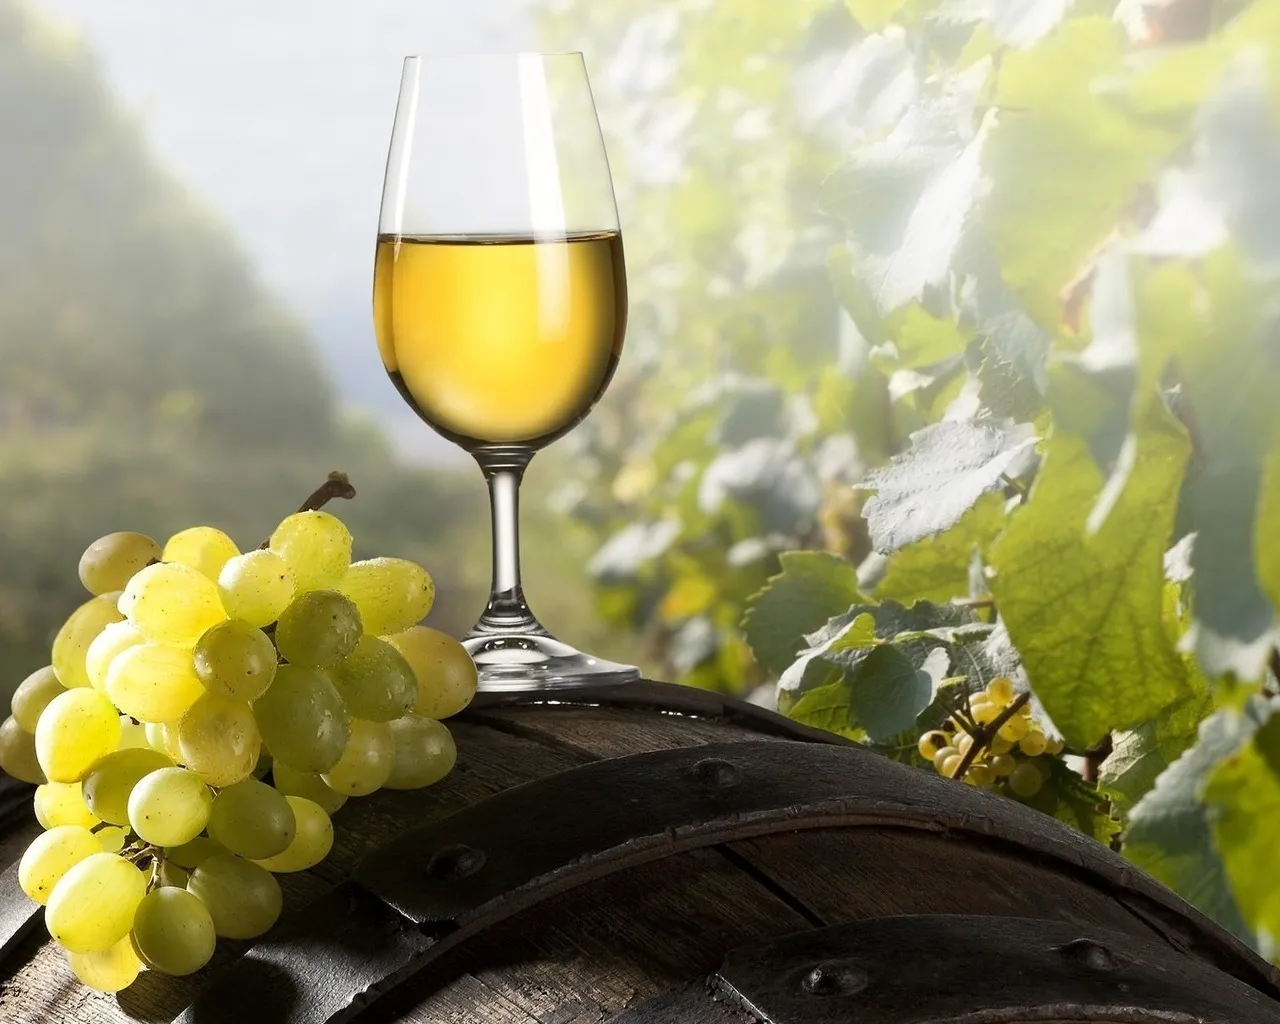 Which grape variety is commonly used to make Pinot Grigio?